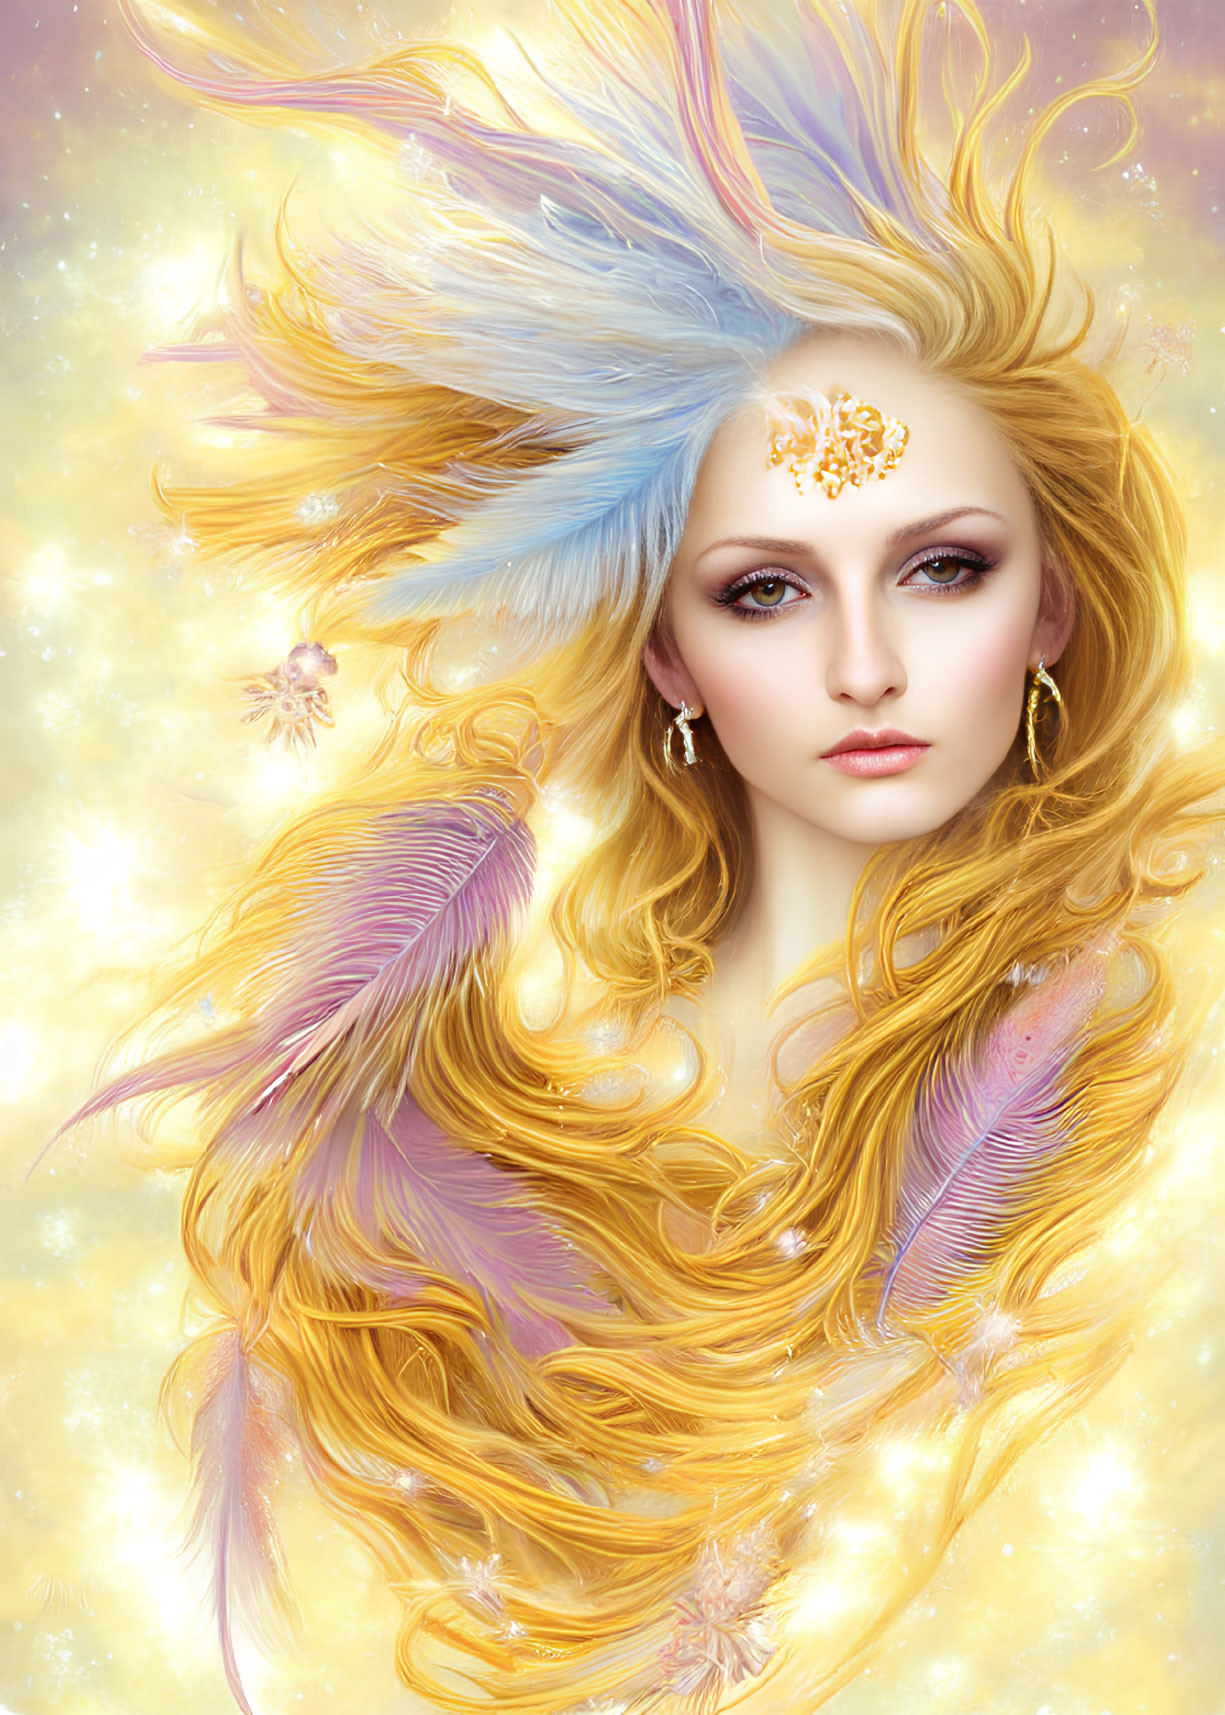 Fantastical image: Woman with golden hair, feather accessories, jewel, starry background